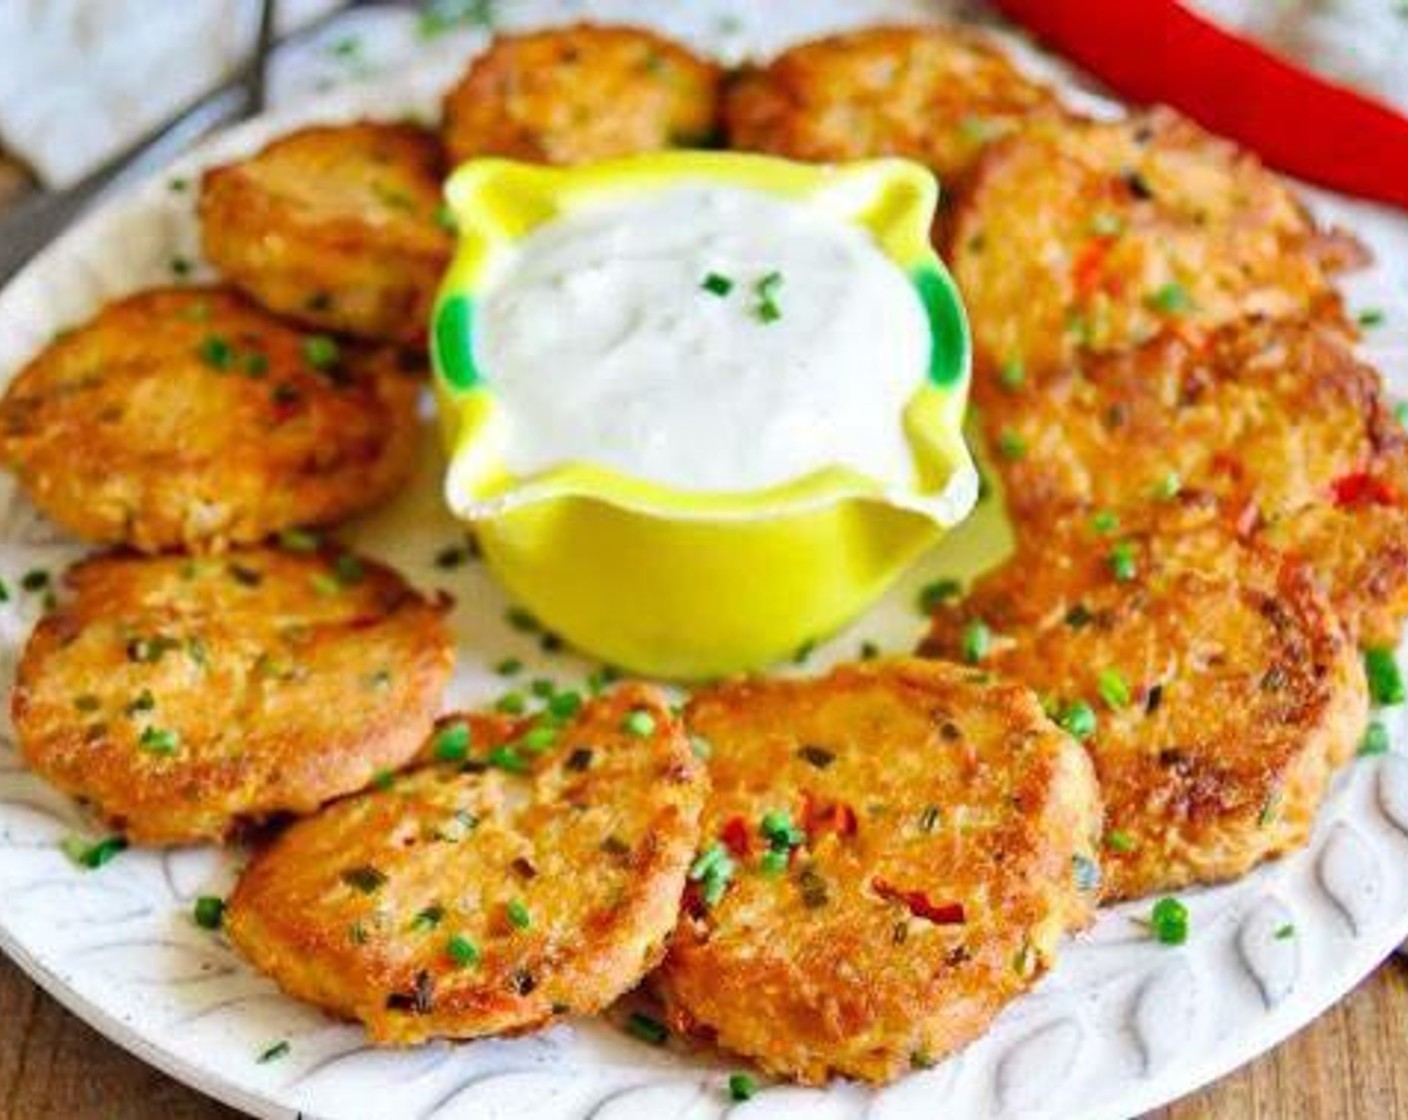 step 15 Transfer the tuna cakes into a dish and place the garlic yogurt aioli alongside to dip. Garnish with Fresh Chives (to taste). Enjoy!